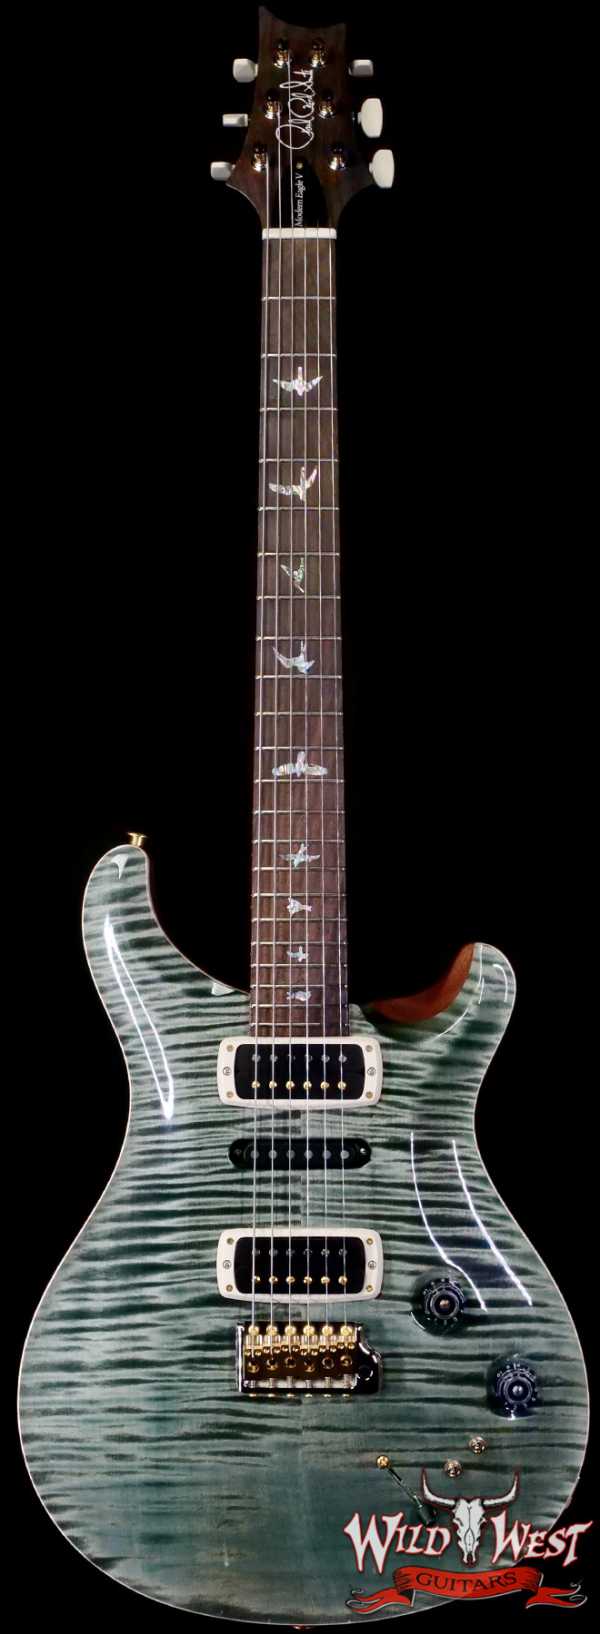 Paul Reed Smith PRS Wood Library 10 Top Modern Eagle V ME5 Flame Maple Neck Brazilian Rosewood Fingerboard Trampas Green 8.80 LBS (US Only / No International Shipping)